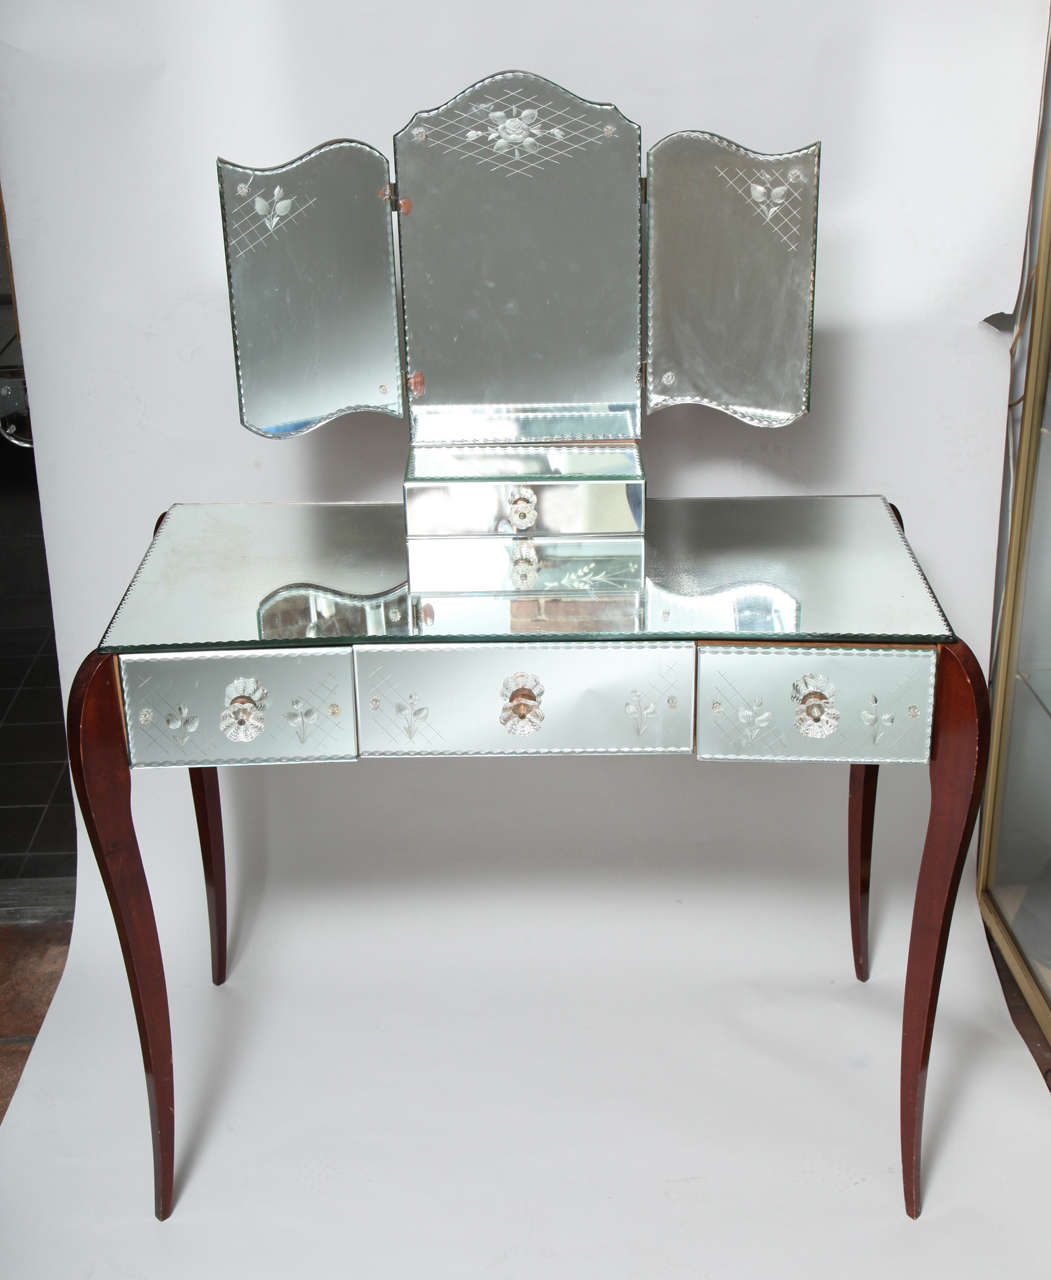 A stunning vanity with delicate french floral etching on pie crust edged mirrored panels and glass handles. A folding matching mirror sits on top a jewelry box. The cabriole legs are sycamore